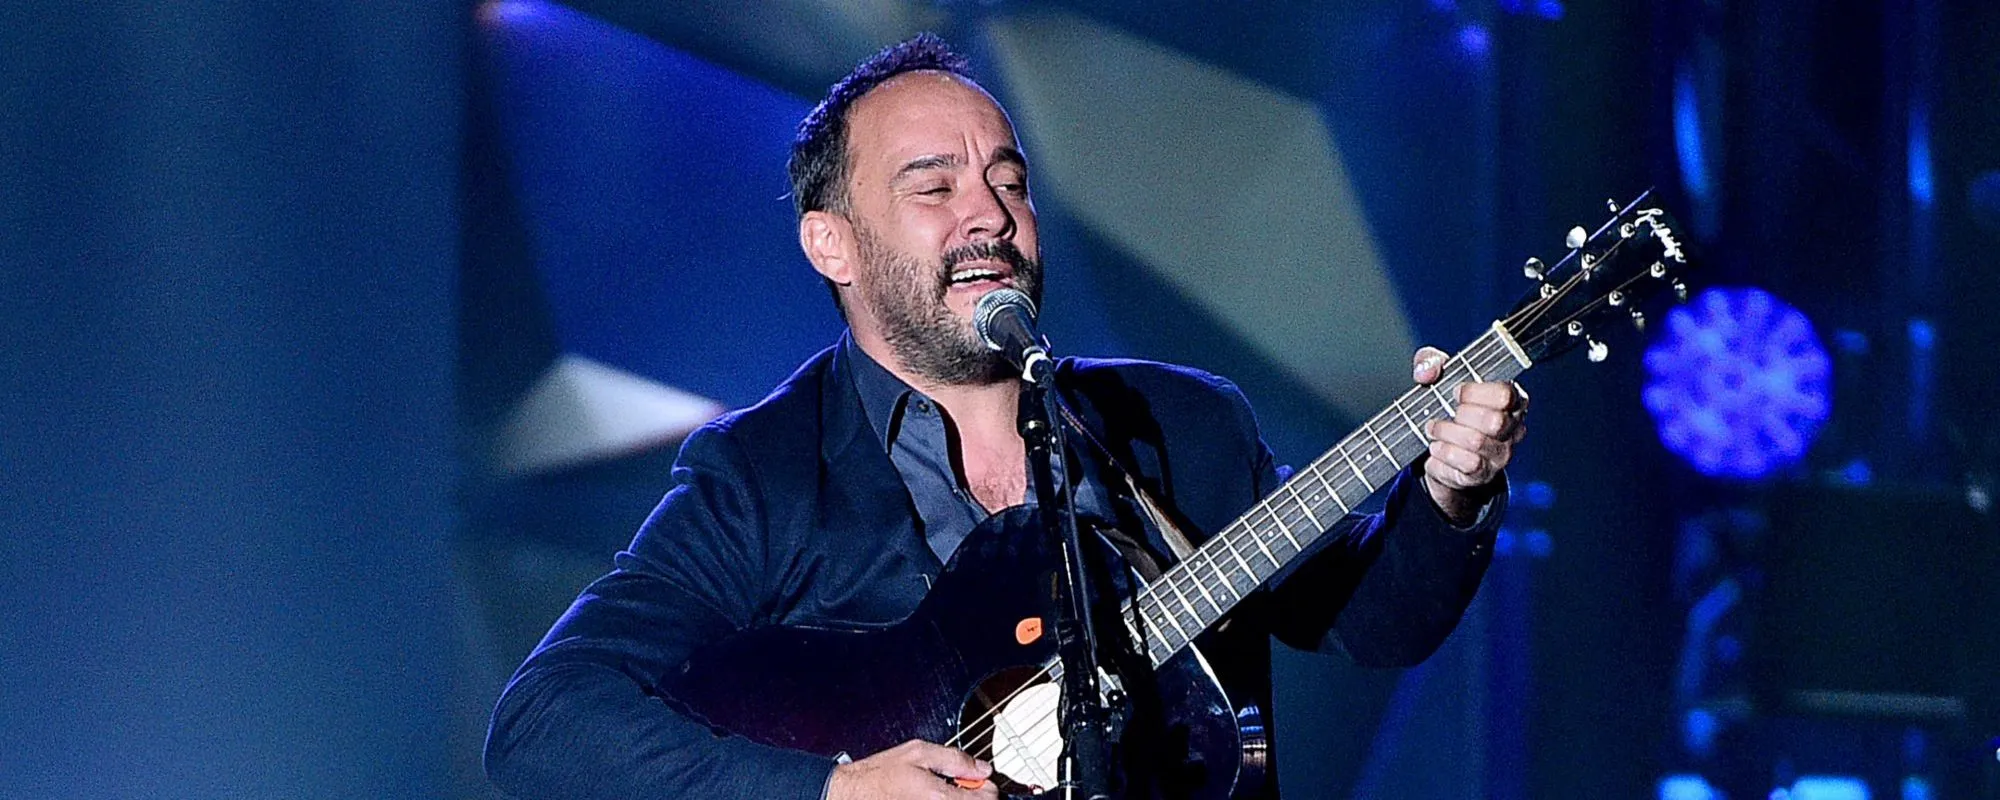 Listen to Dave Matthews’ Cover “Funny How Time Slips Away” from ‘Long Story Short: Willie Nelson 90 Live from the Hollywood Bowl’